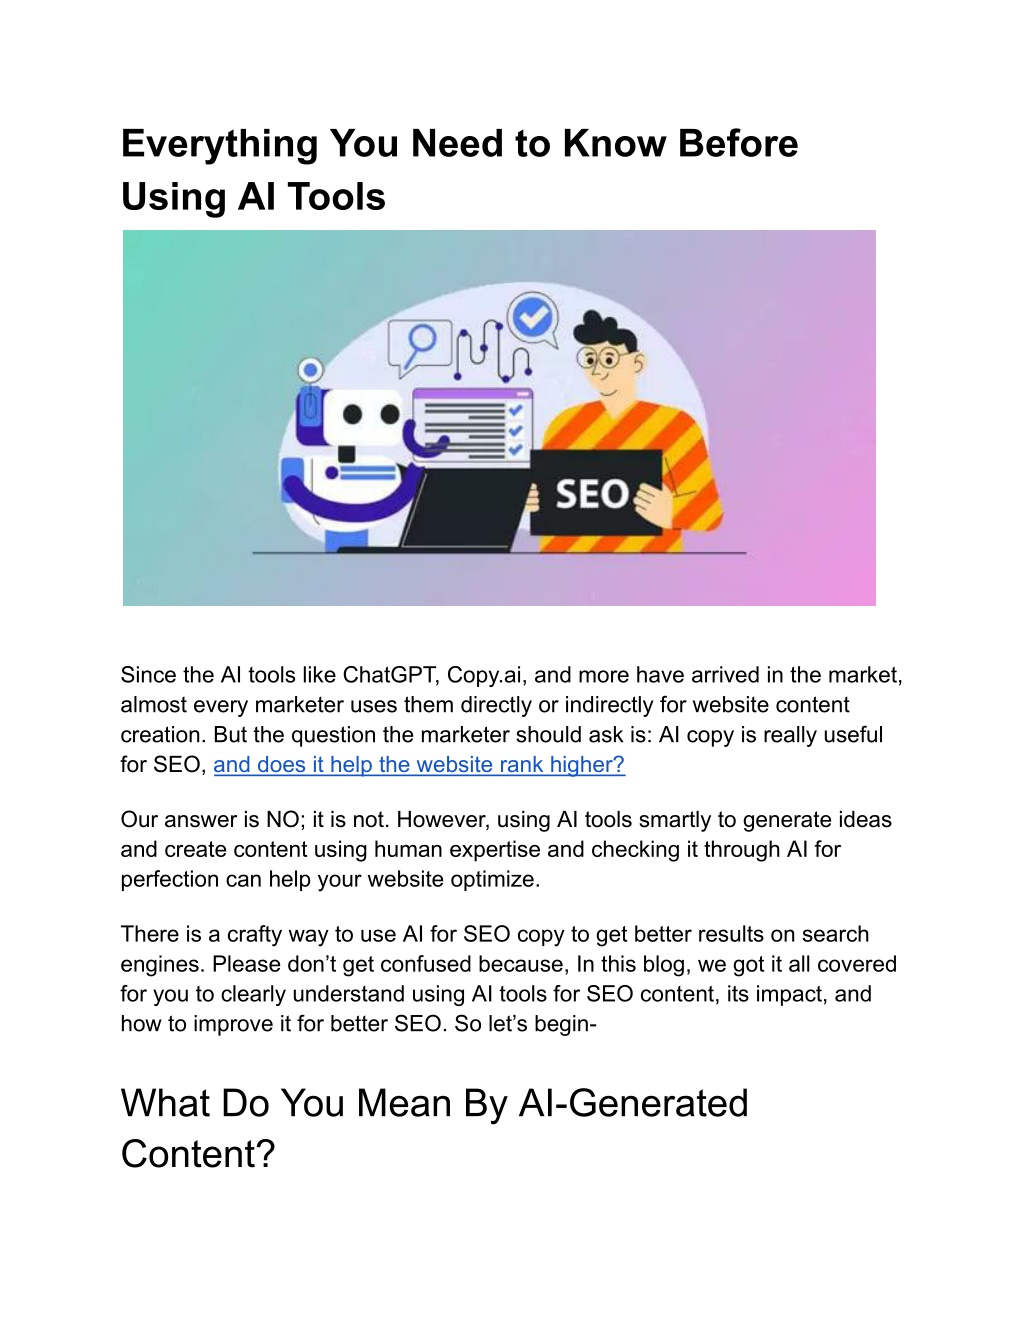 Everyone can tell you're using AI & ChatGPT to create content